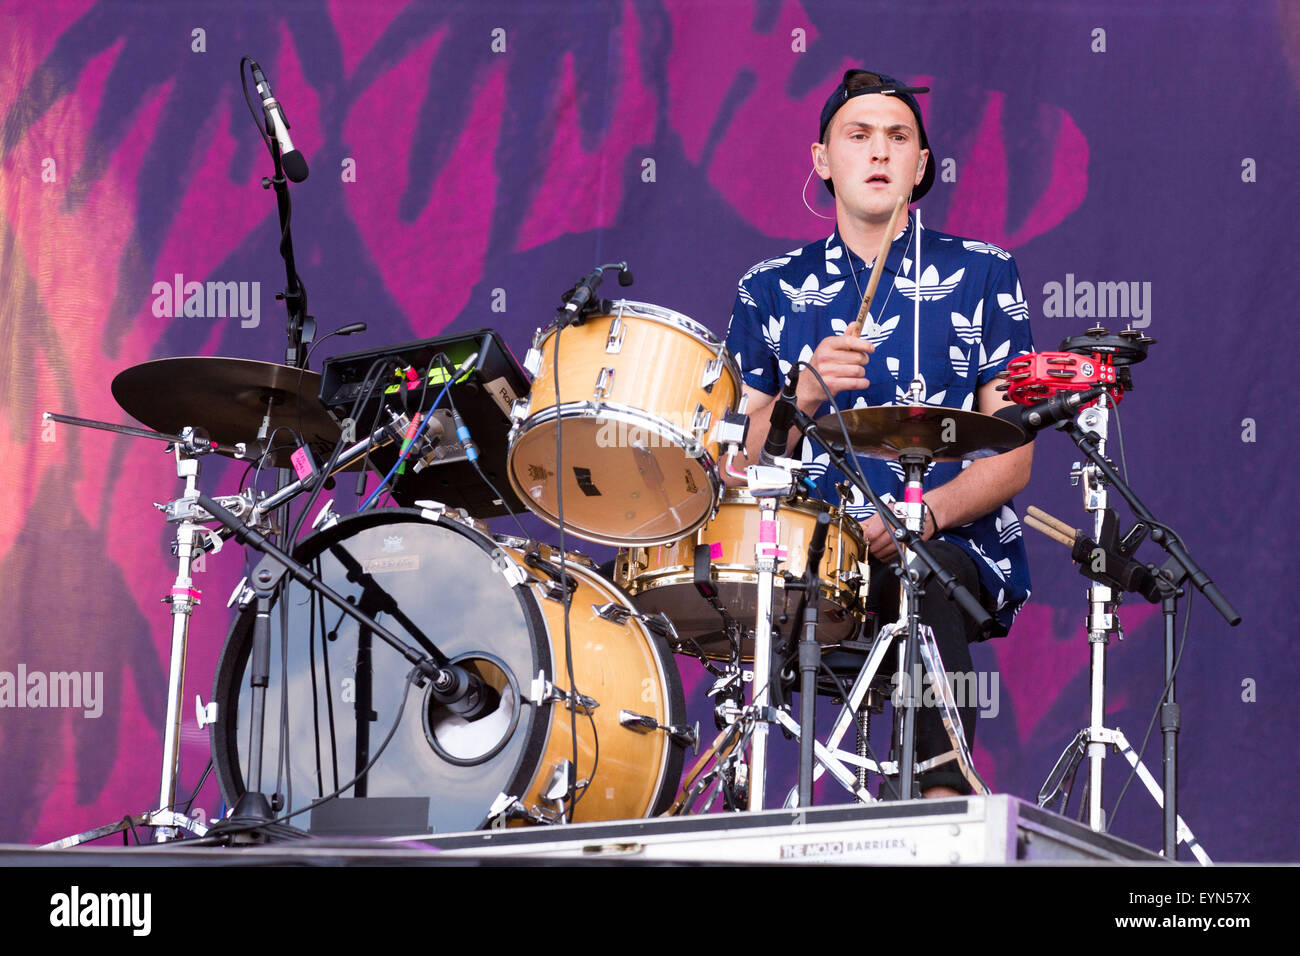 July 31, 2015 - Chicago, Illinois,  - Drummer JOE SEAWARD of Glass  Animals performs live in Grant